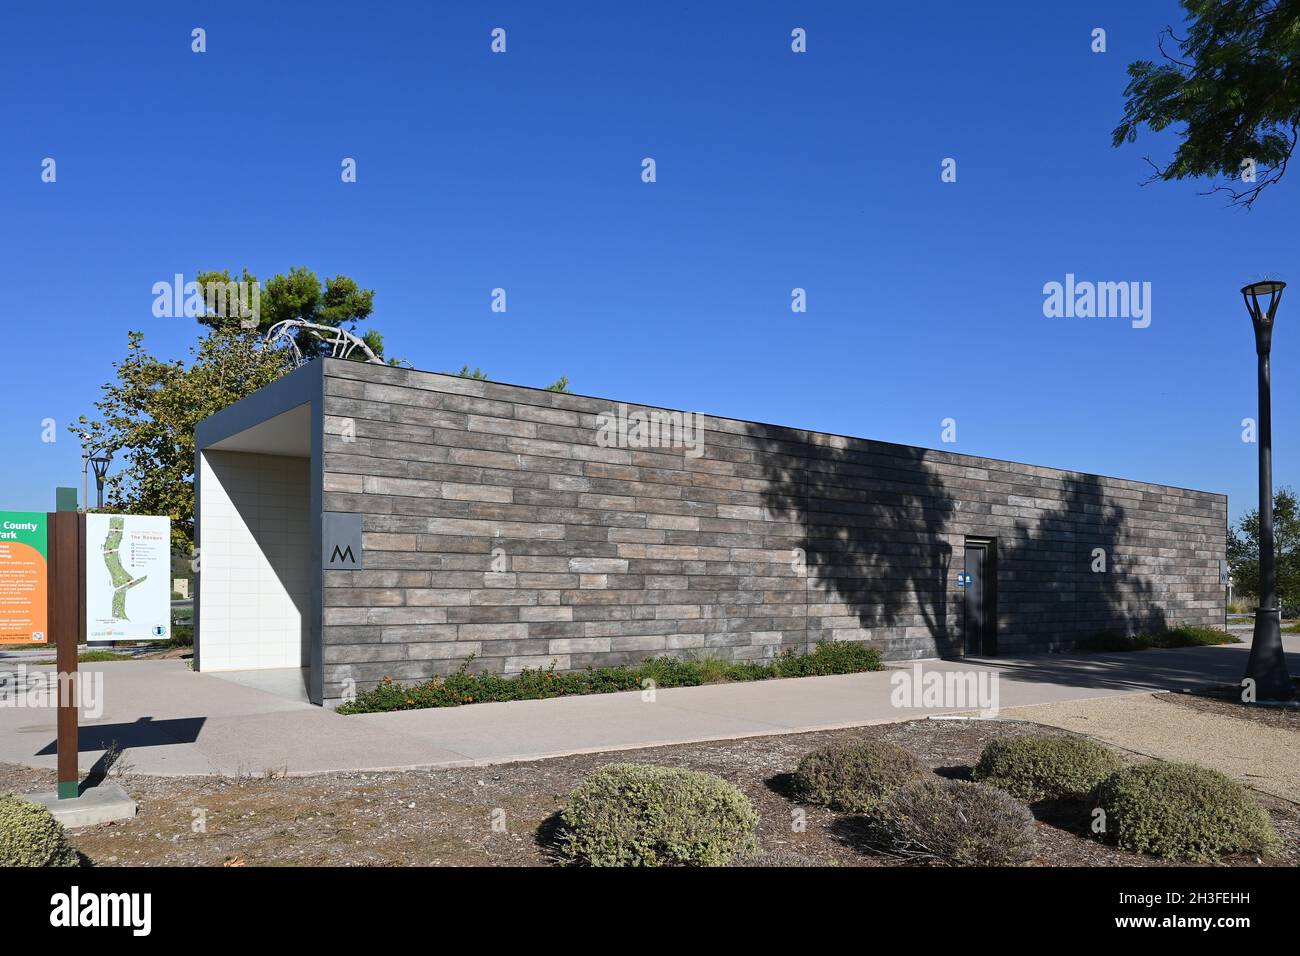 IRVINE, CALIFORNIA - 27 OCT 2021: Restrooms at the Benchmark entrance to the Great Park Trails,a  1.5 mile walking and biking space throughout the Upp Stock Photo